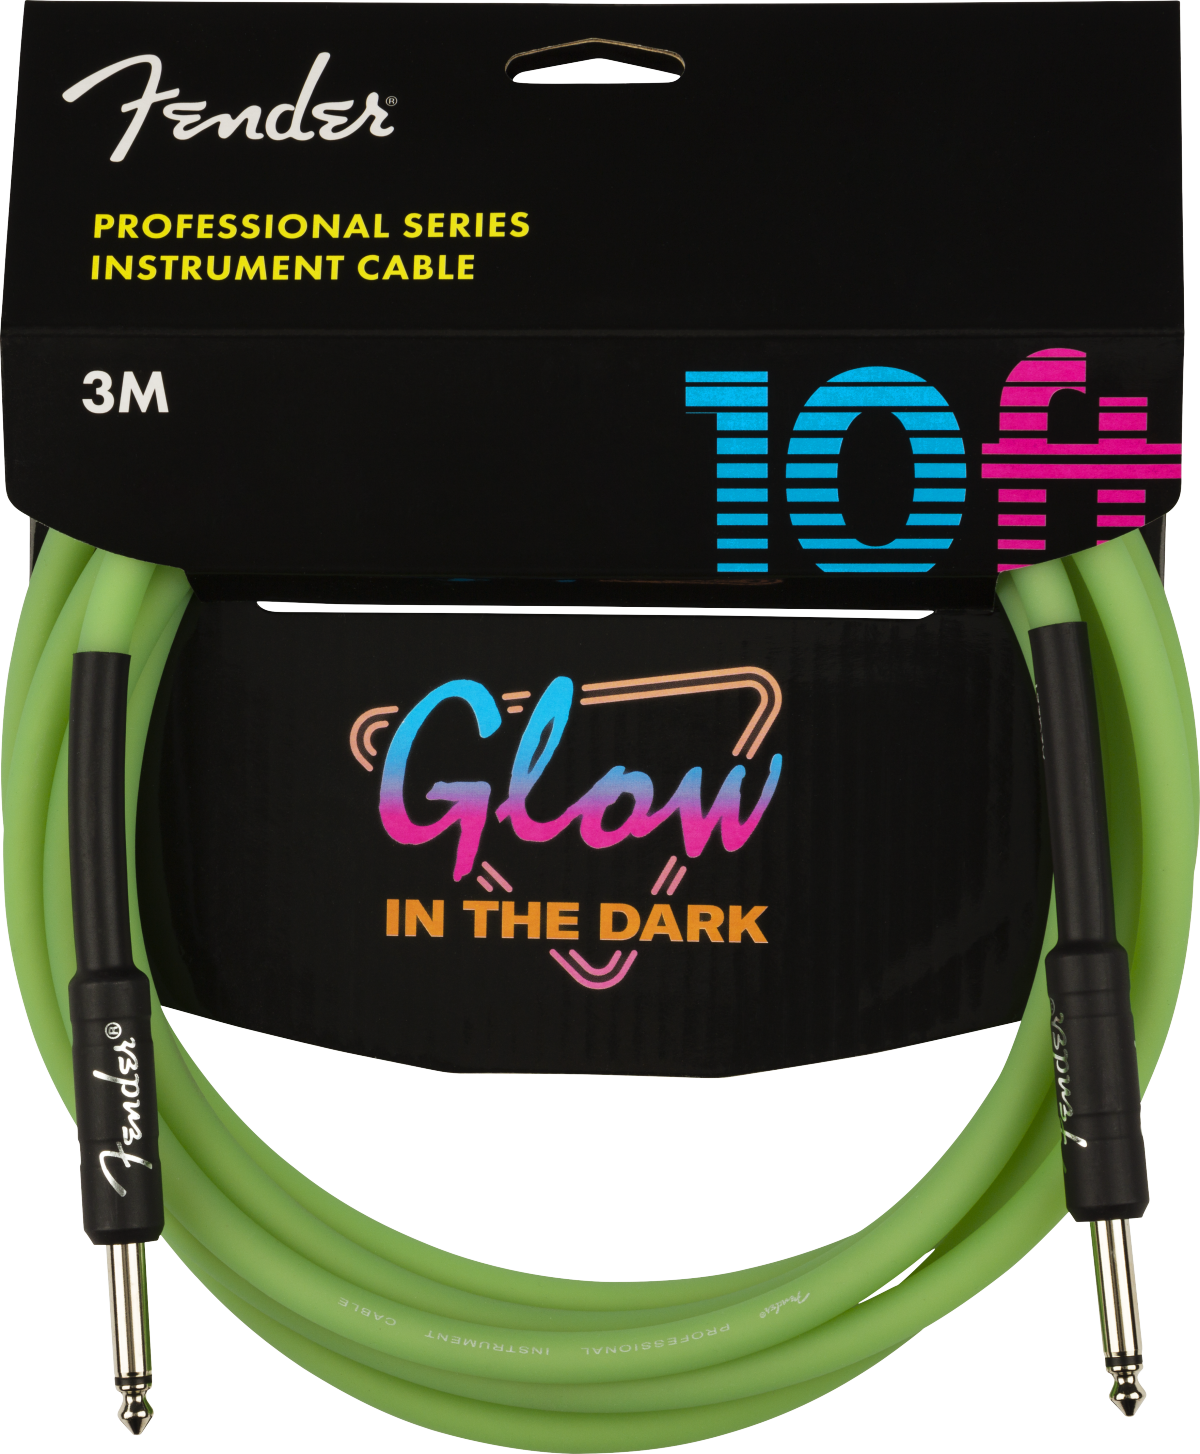 Fender Pro Glow In The Dark Instrument Cable Droit/droit 10ft Green - Cable - Variation 1